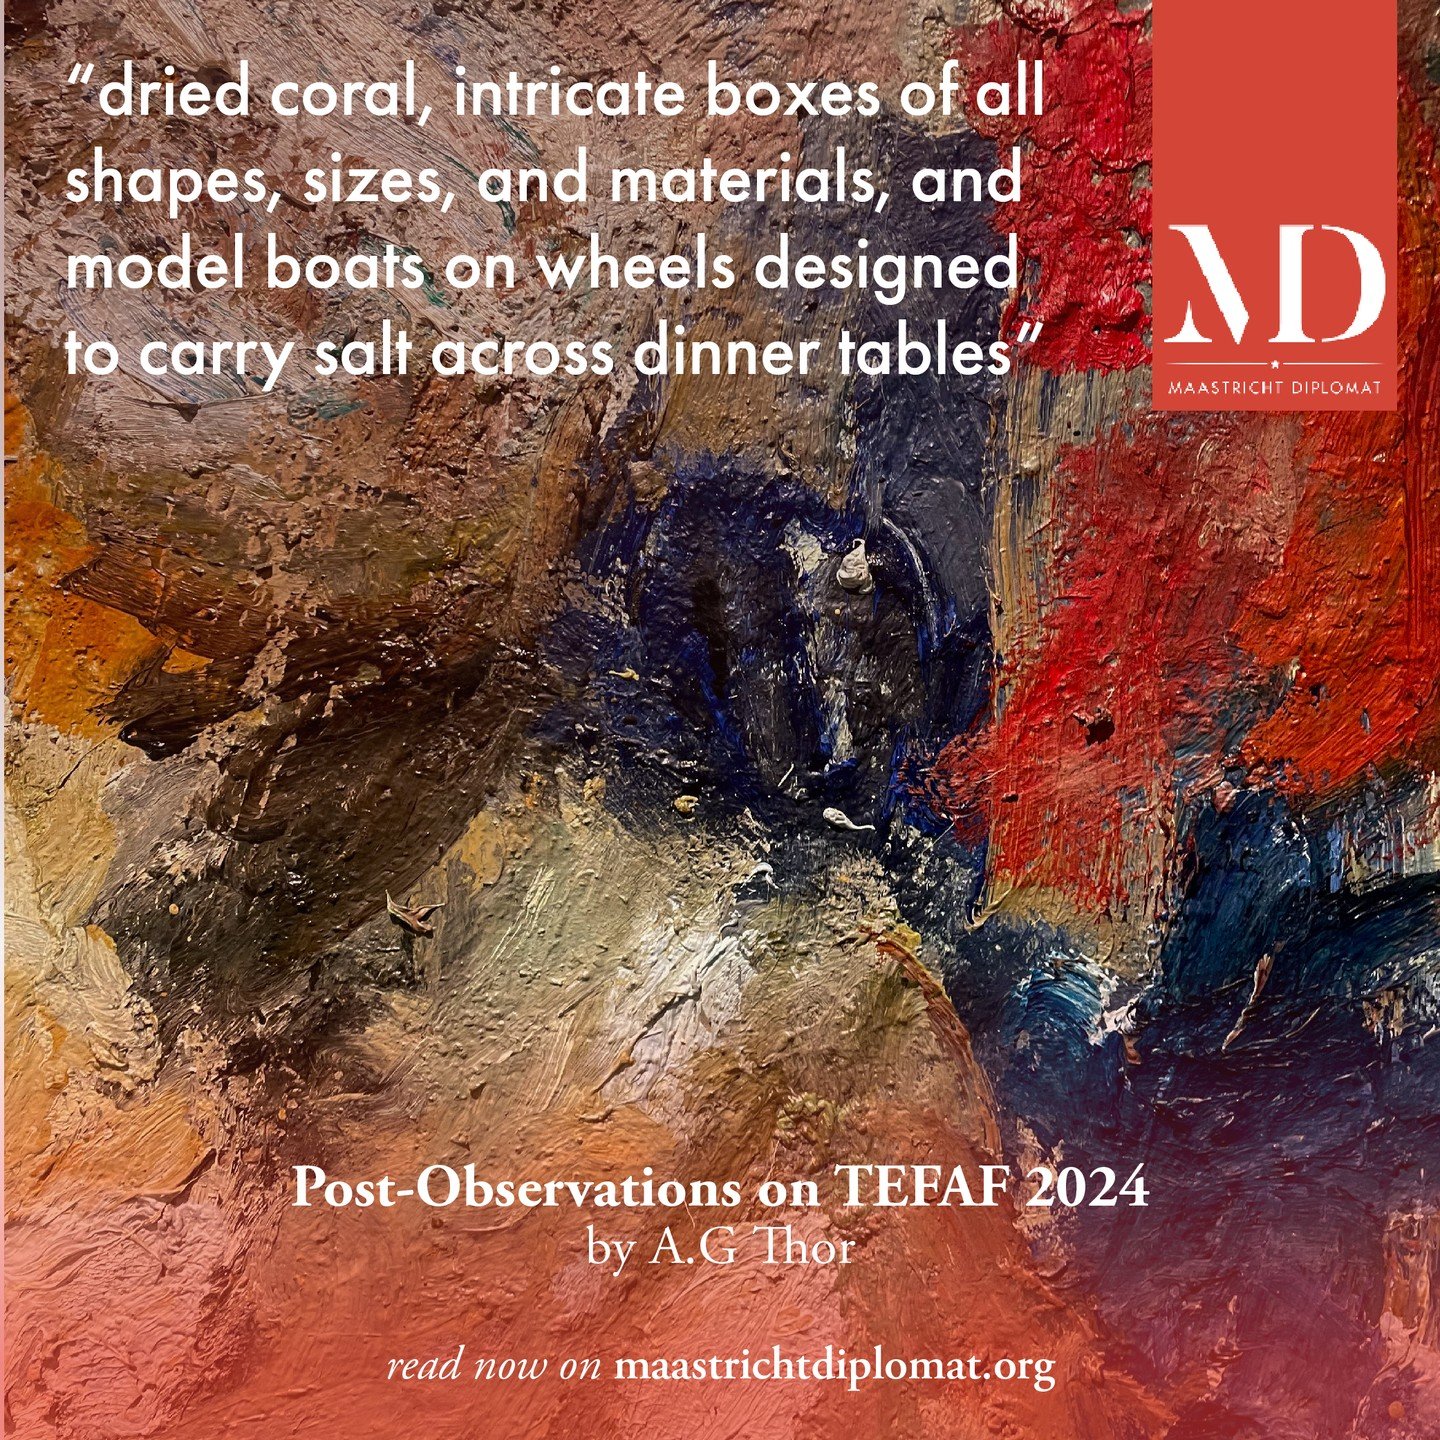 A reflection on TEFAF Maastricht 2024, outlining the general atmosphere before zooming in on three galleries and three paintings found at the fair.

Read the entire article at: 
https://www.maastrichtdiplomat.org/post/post-observations-on-tefaf-2024
